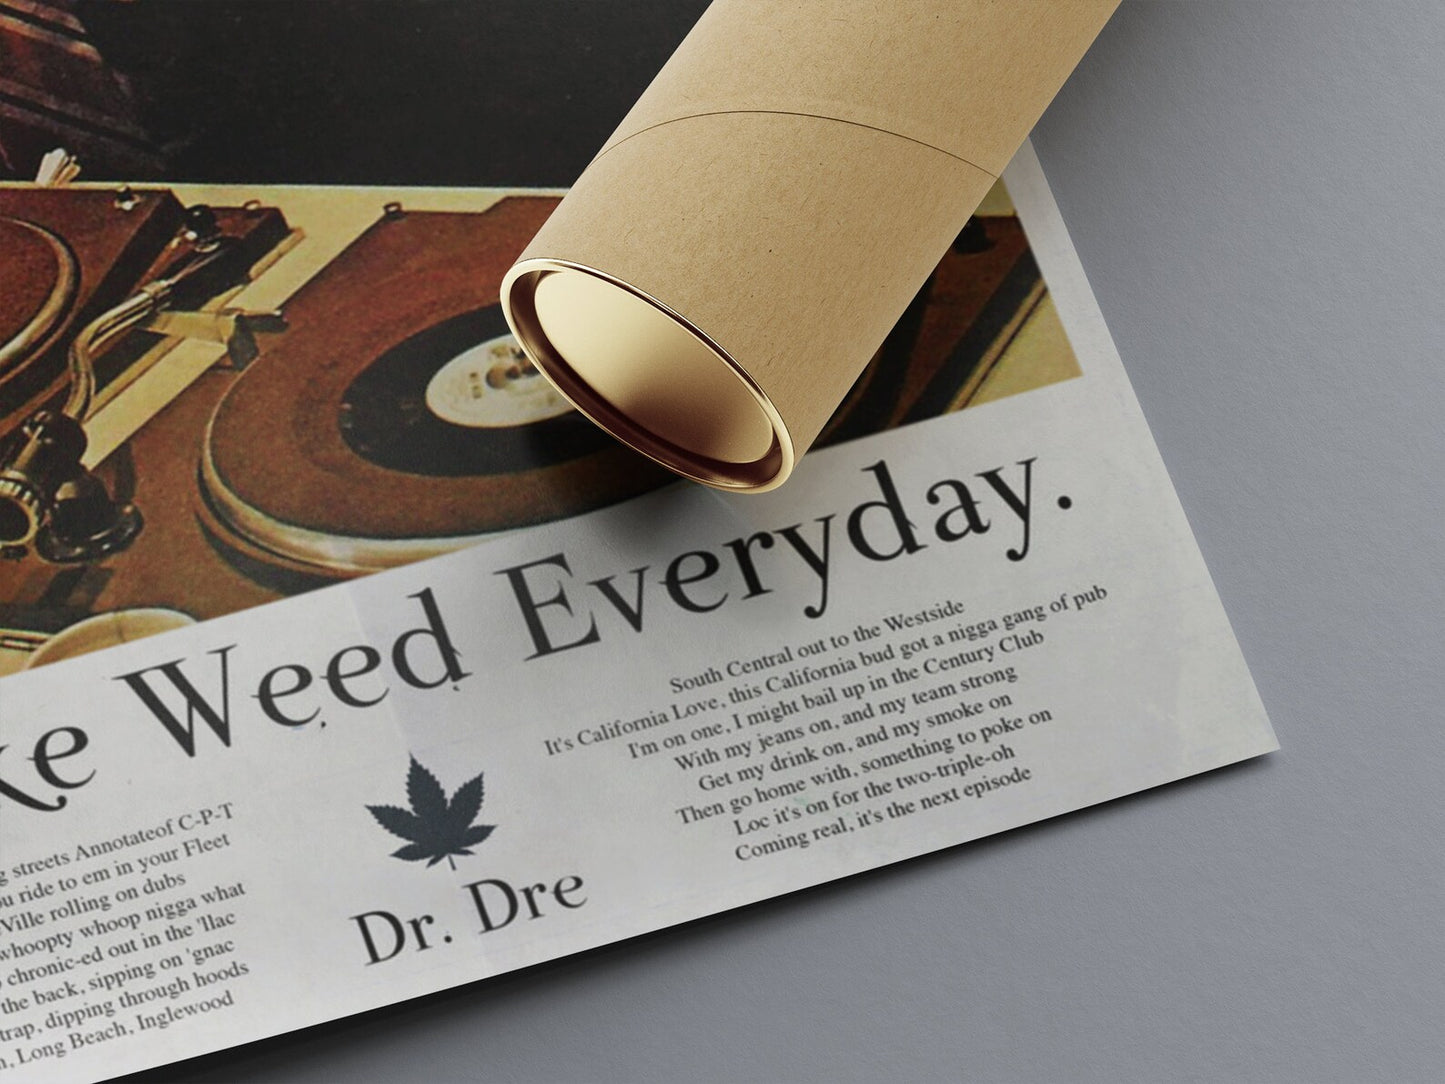 SMOKE WEED EVERYDAY - DRE AND SNOOP POSTER